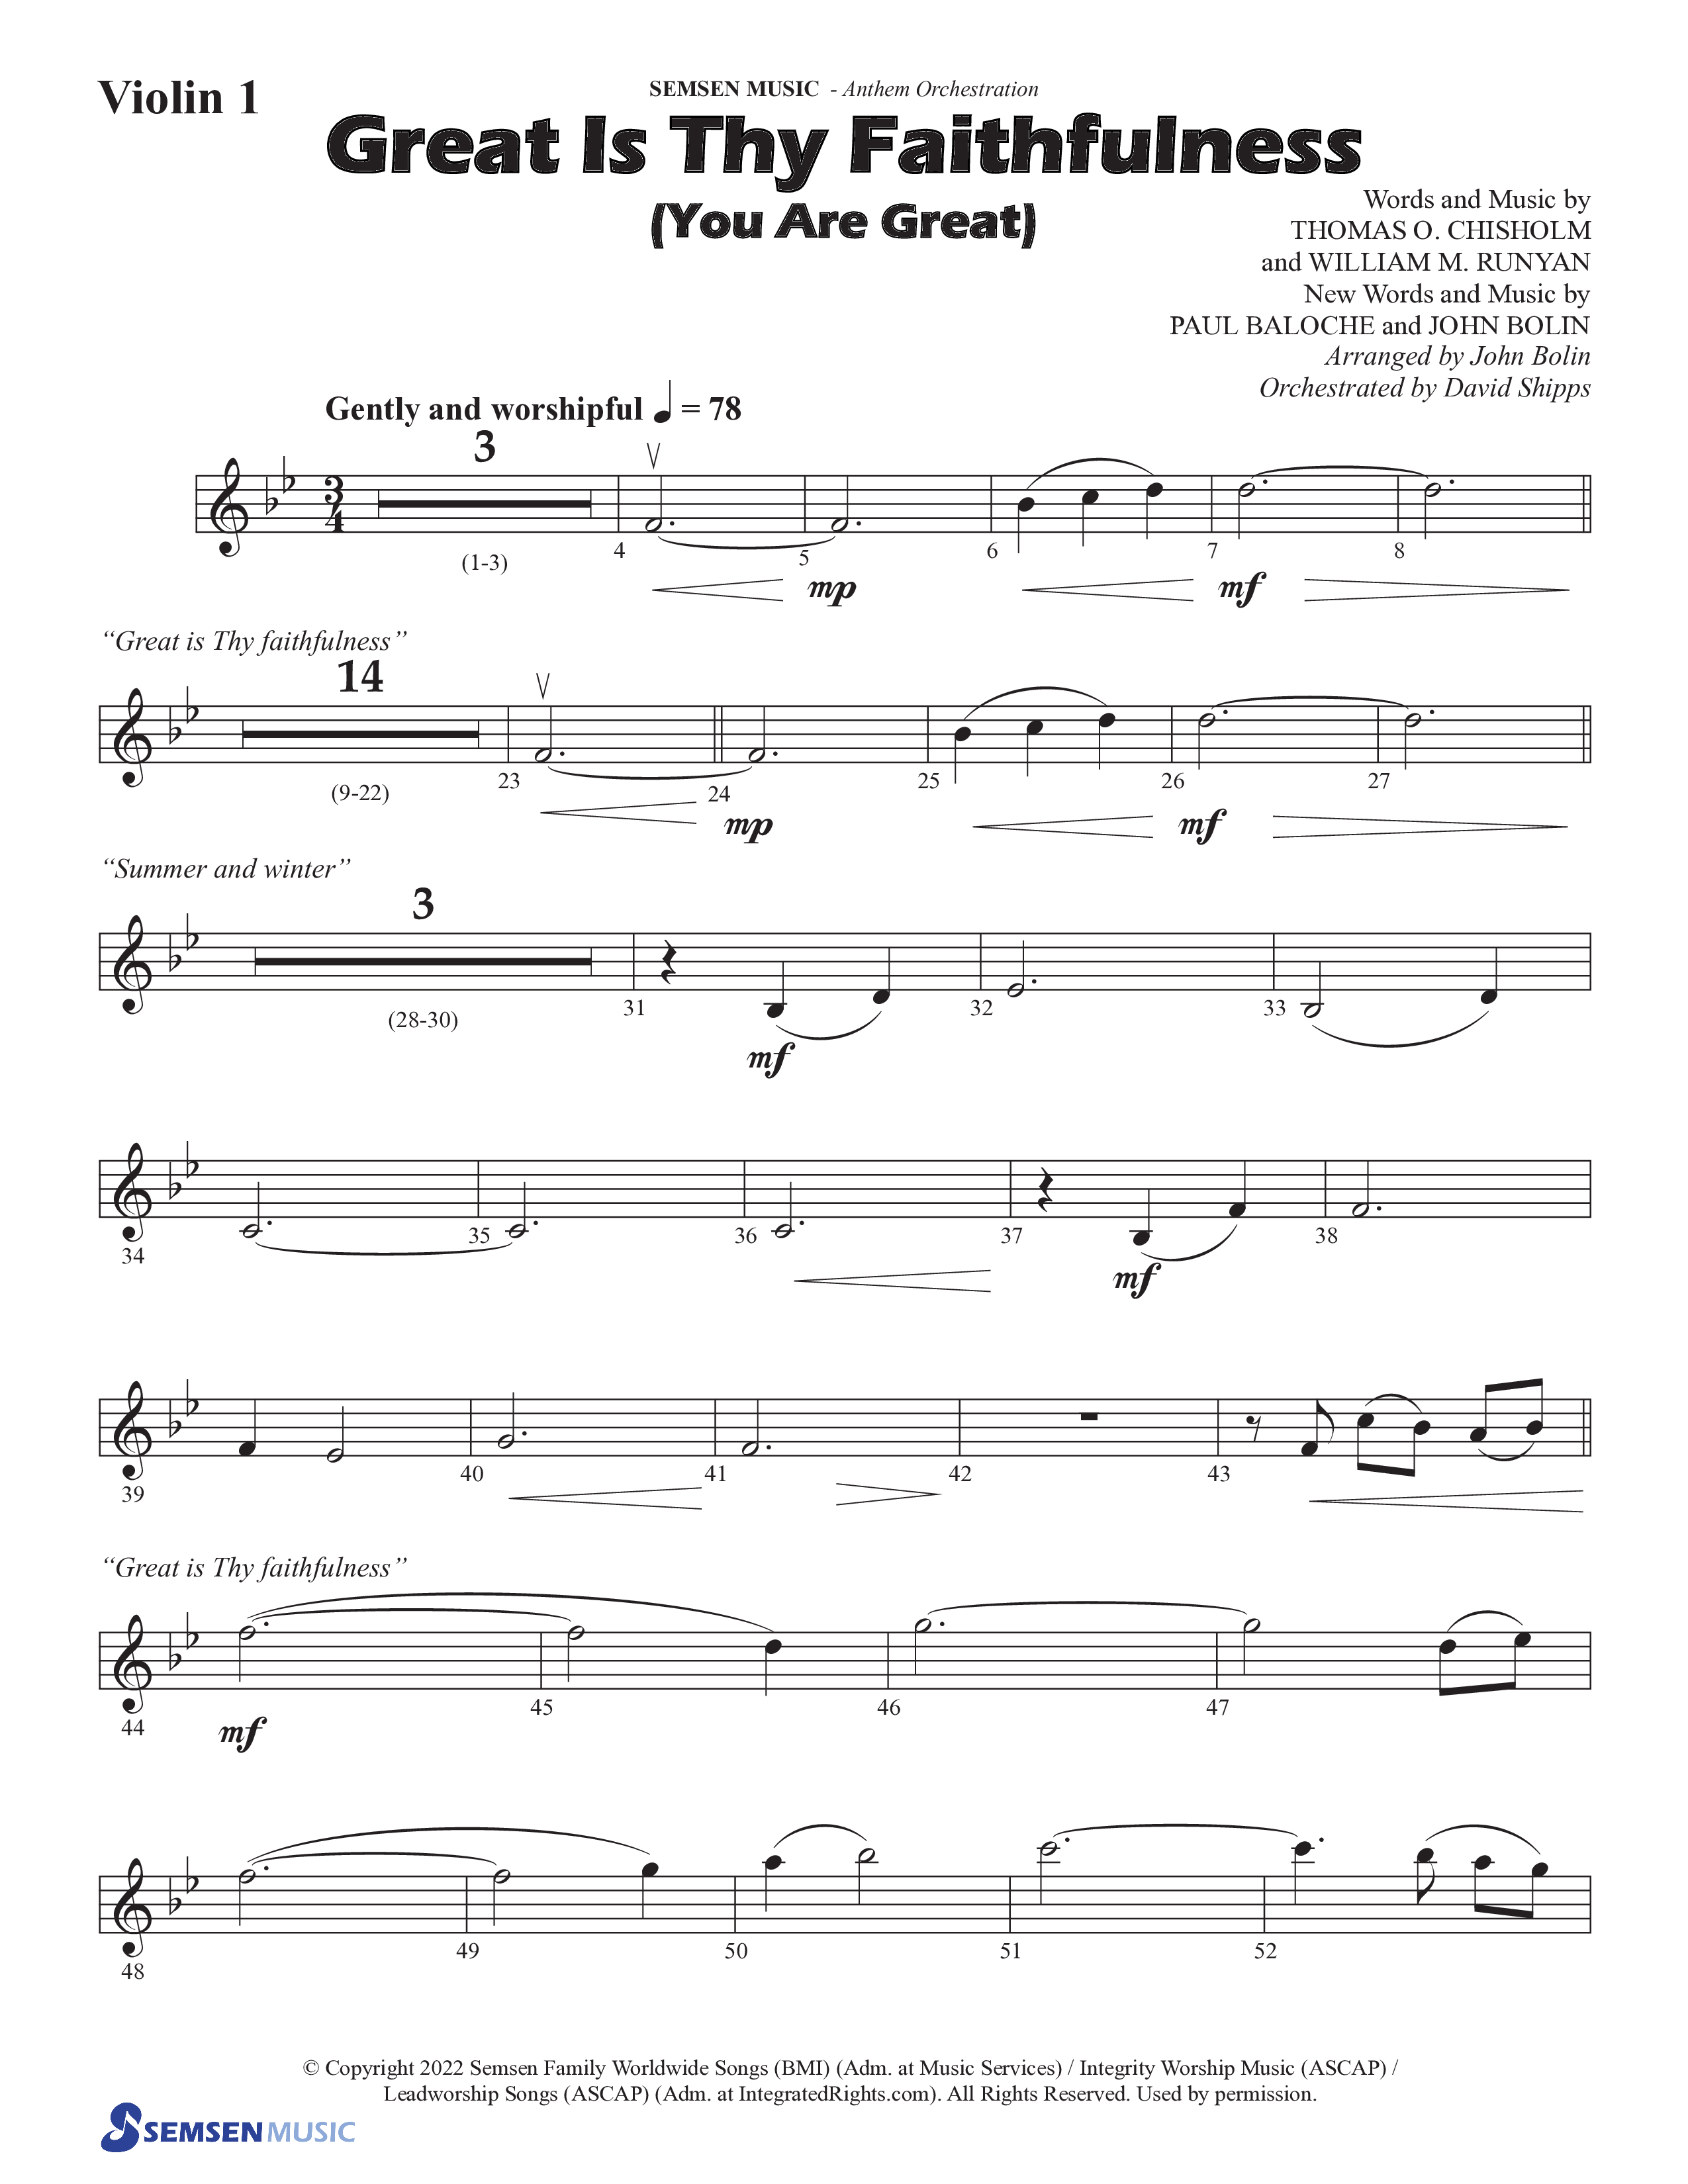 Great Is Thy Faithfulness (You Are Great) (Choral Anthem SATB) Violin 1 (Semsen Music / Arr. John Bolin / Orch. David Shipps)